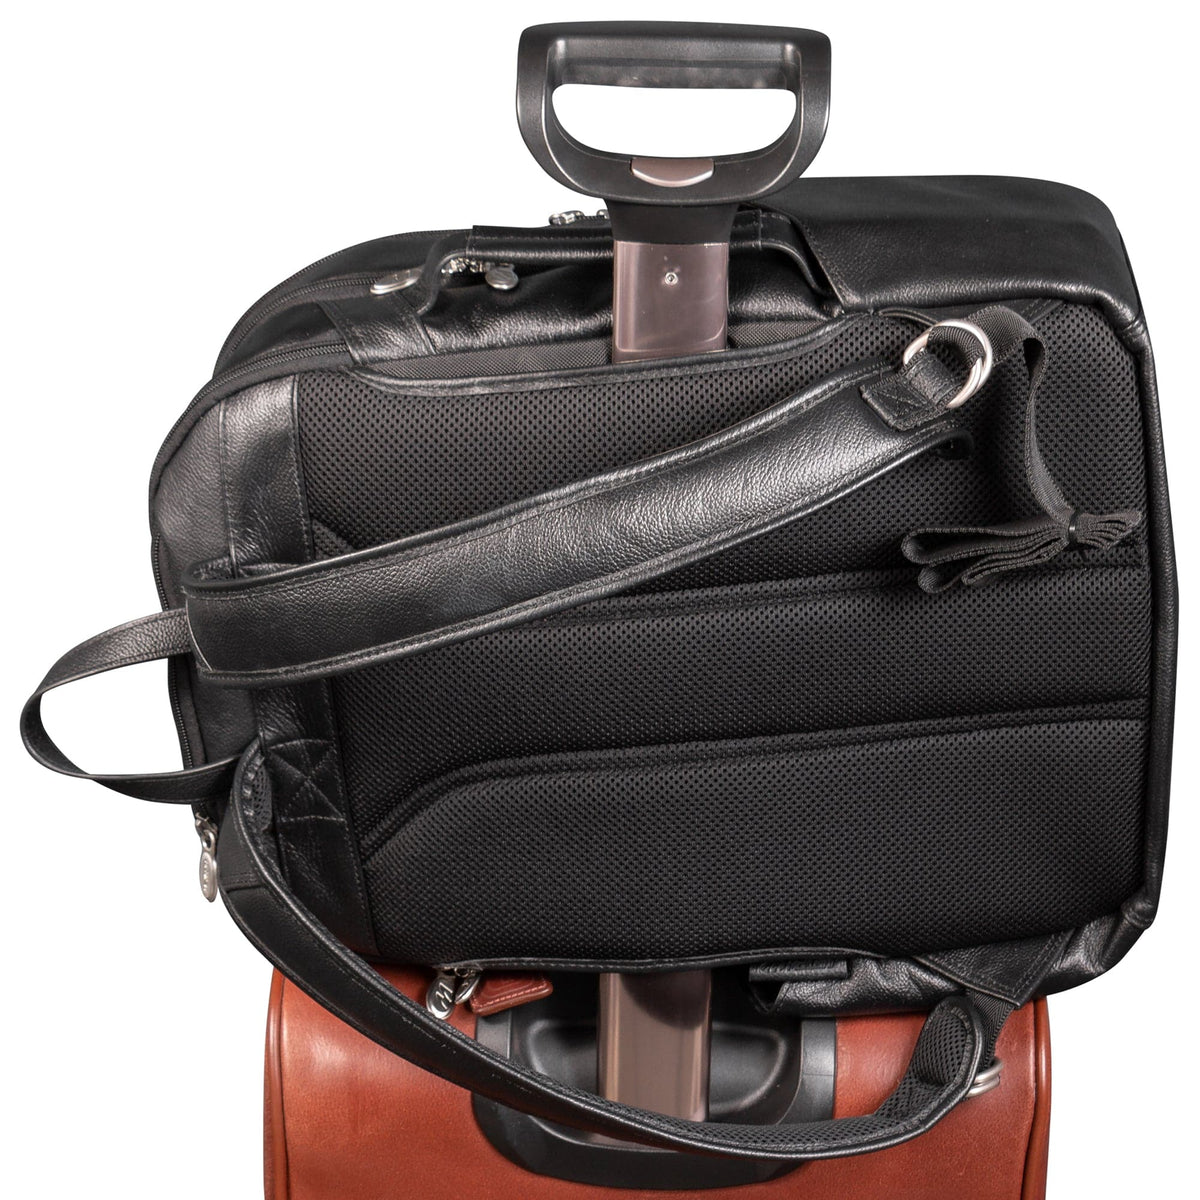 McKlein U Series Englewood 17" Triple Compartment Carry-All Laptop and Tablet Weekend Leather Backpack